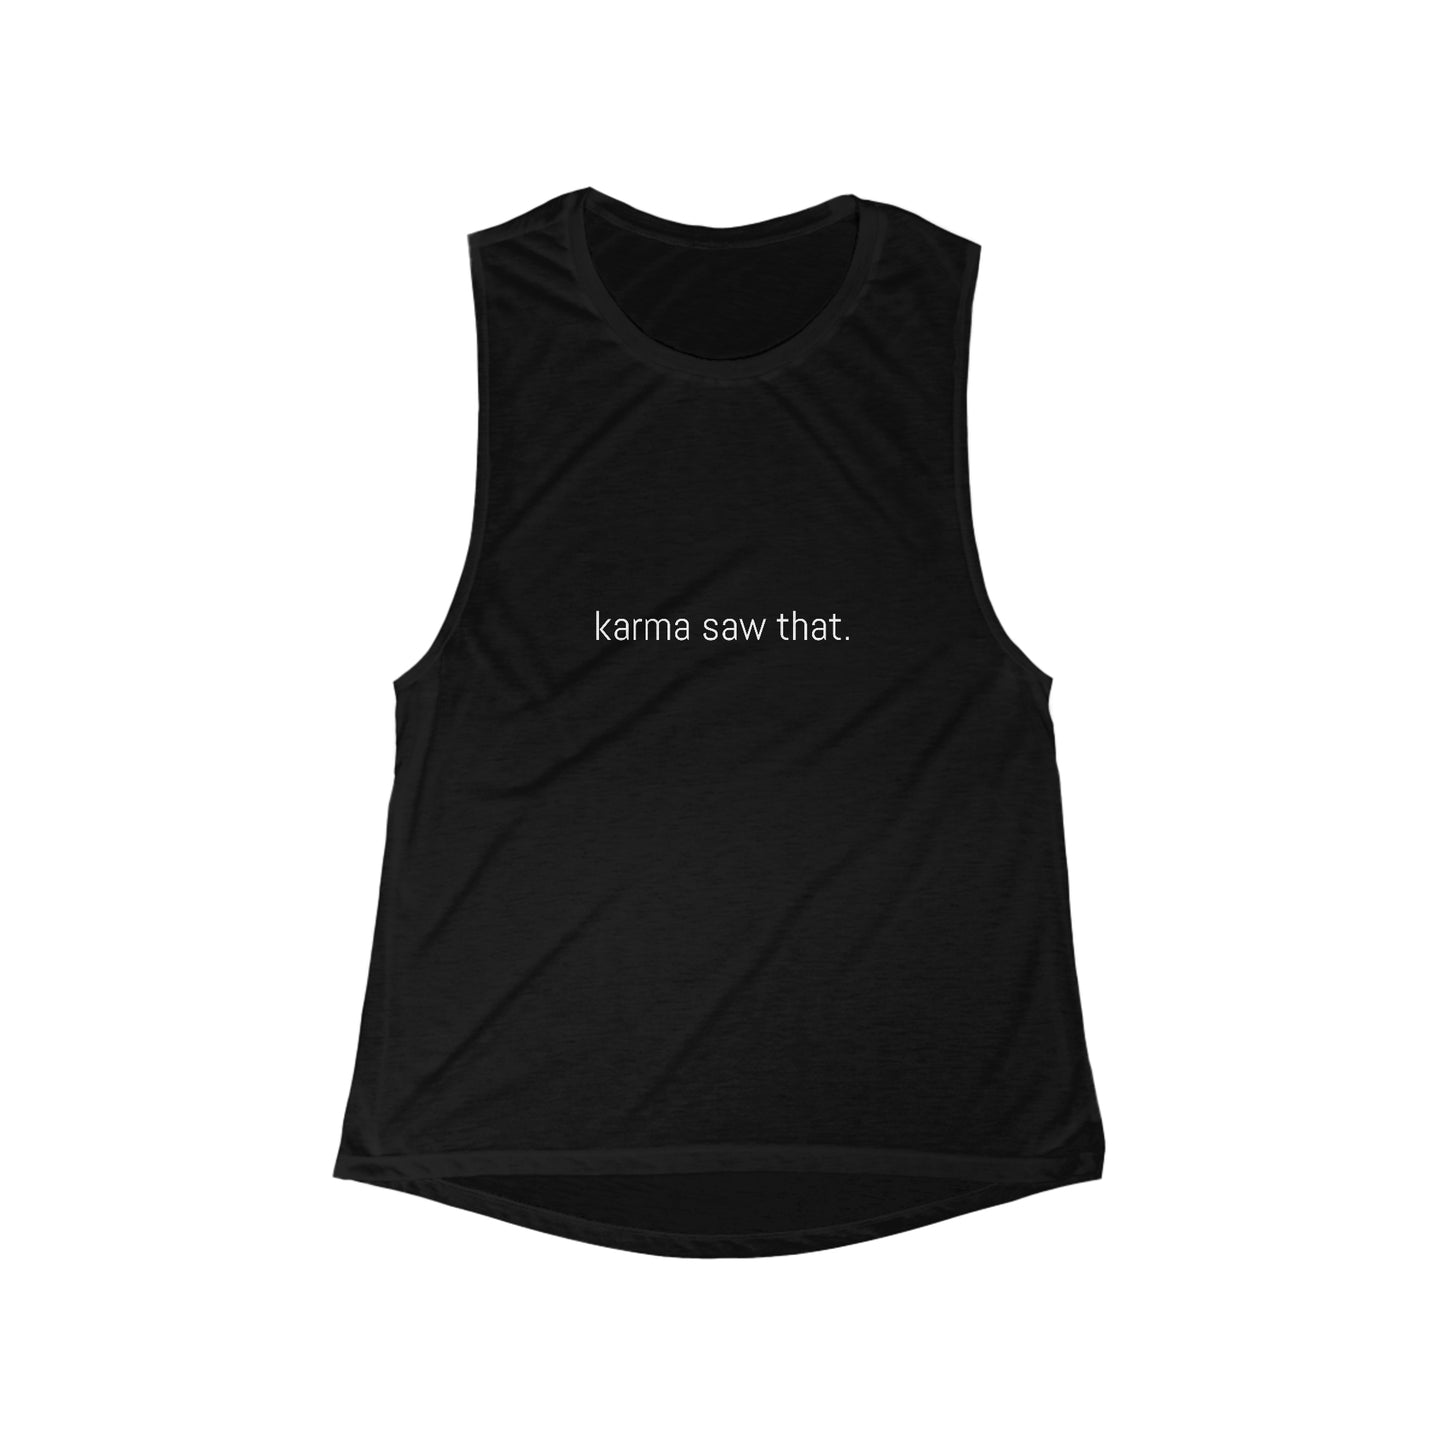 Ath"leisure" Collection- Karma Saw That Women's Flowy Scoop Muscle Tank